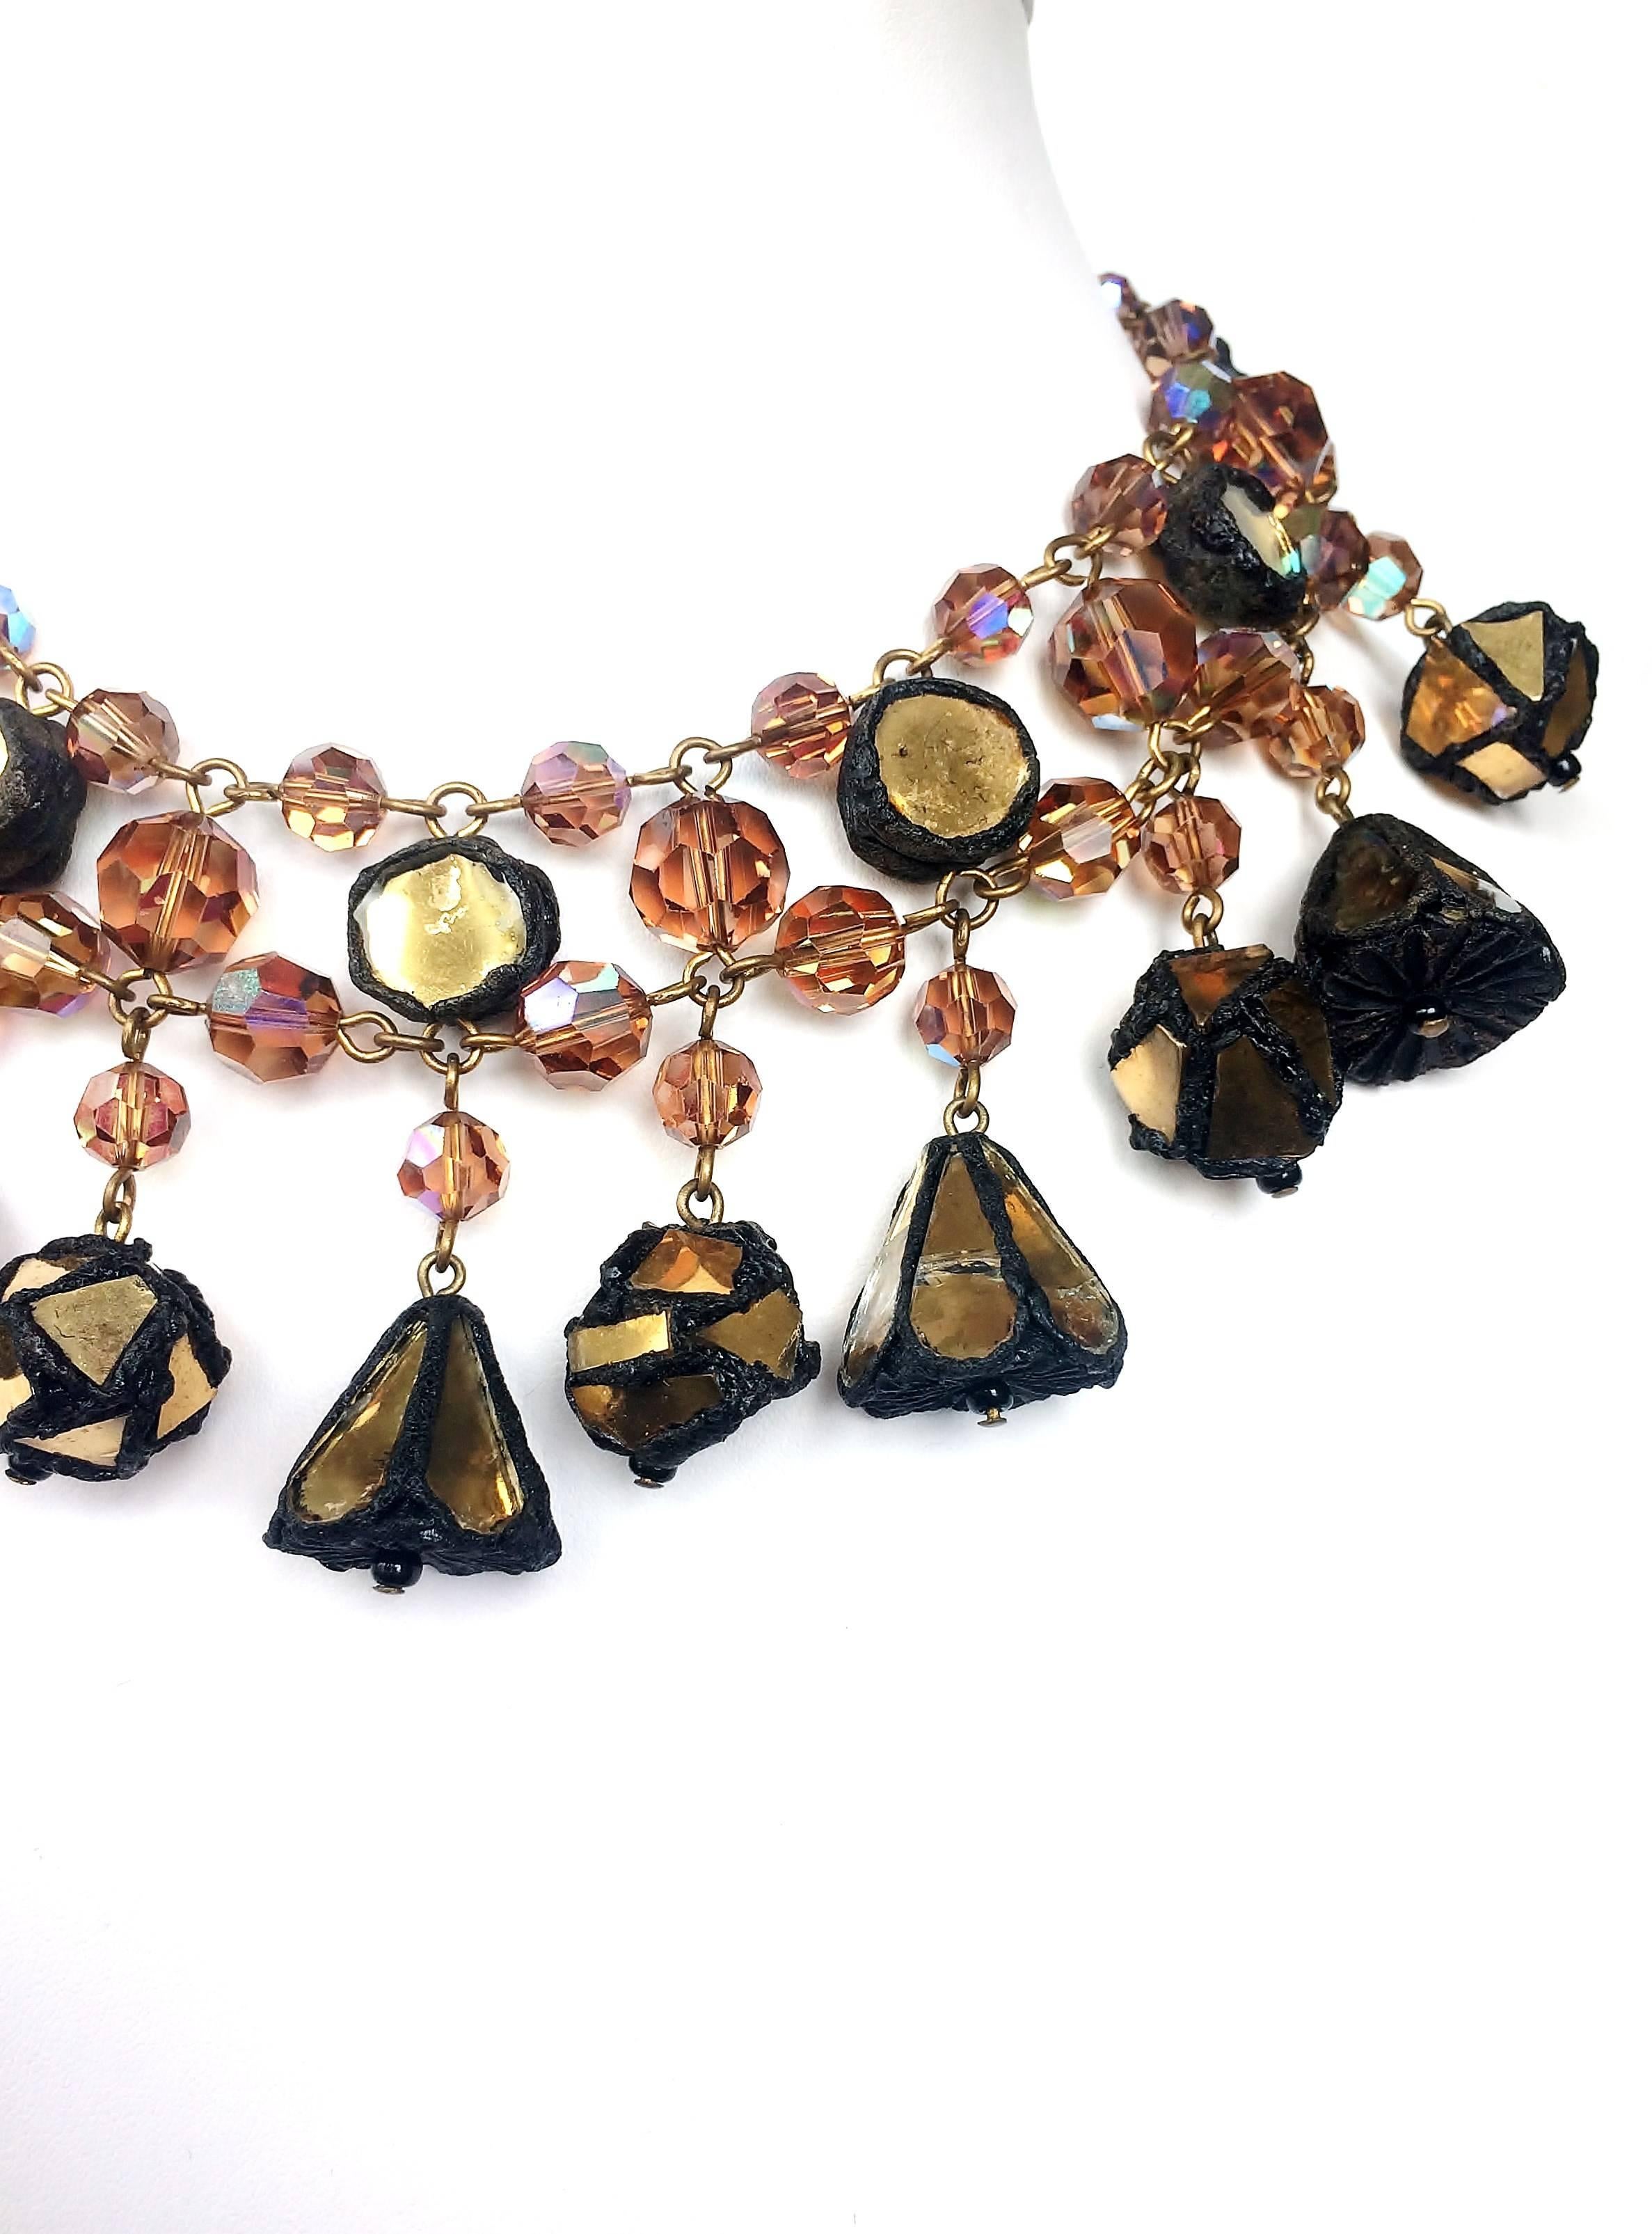 A striking and dynamic glass bead necklace, mixed with pieces of coloured mirror, set in resin (talousel), with assorted pendant drops of varying shape, from the 1960s. This design is often attributed to Line Vautrin, the celebrated jewellery